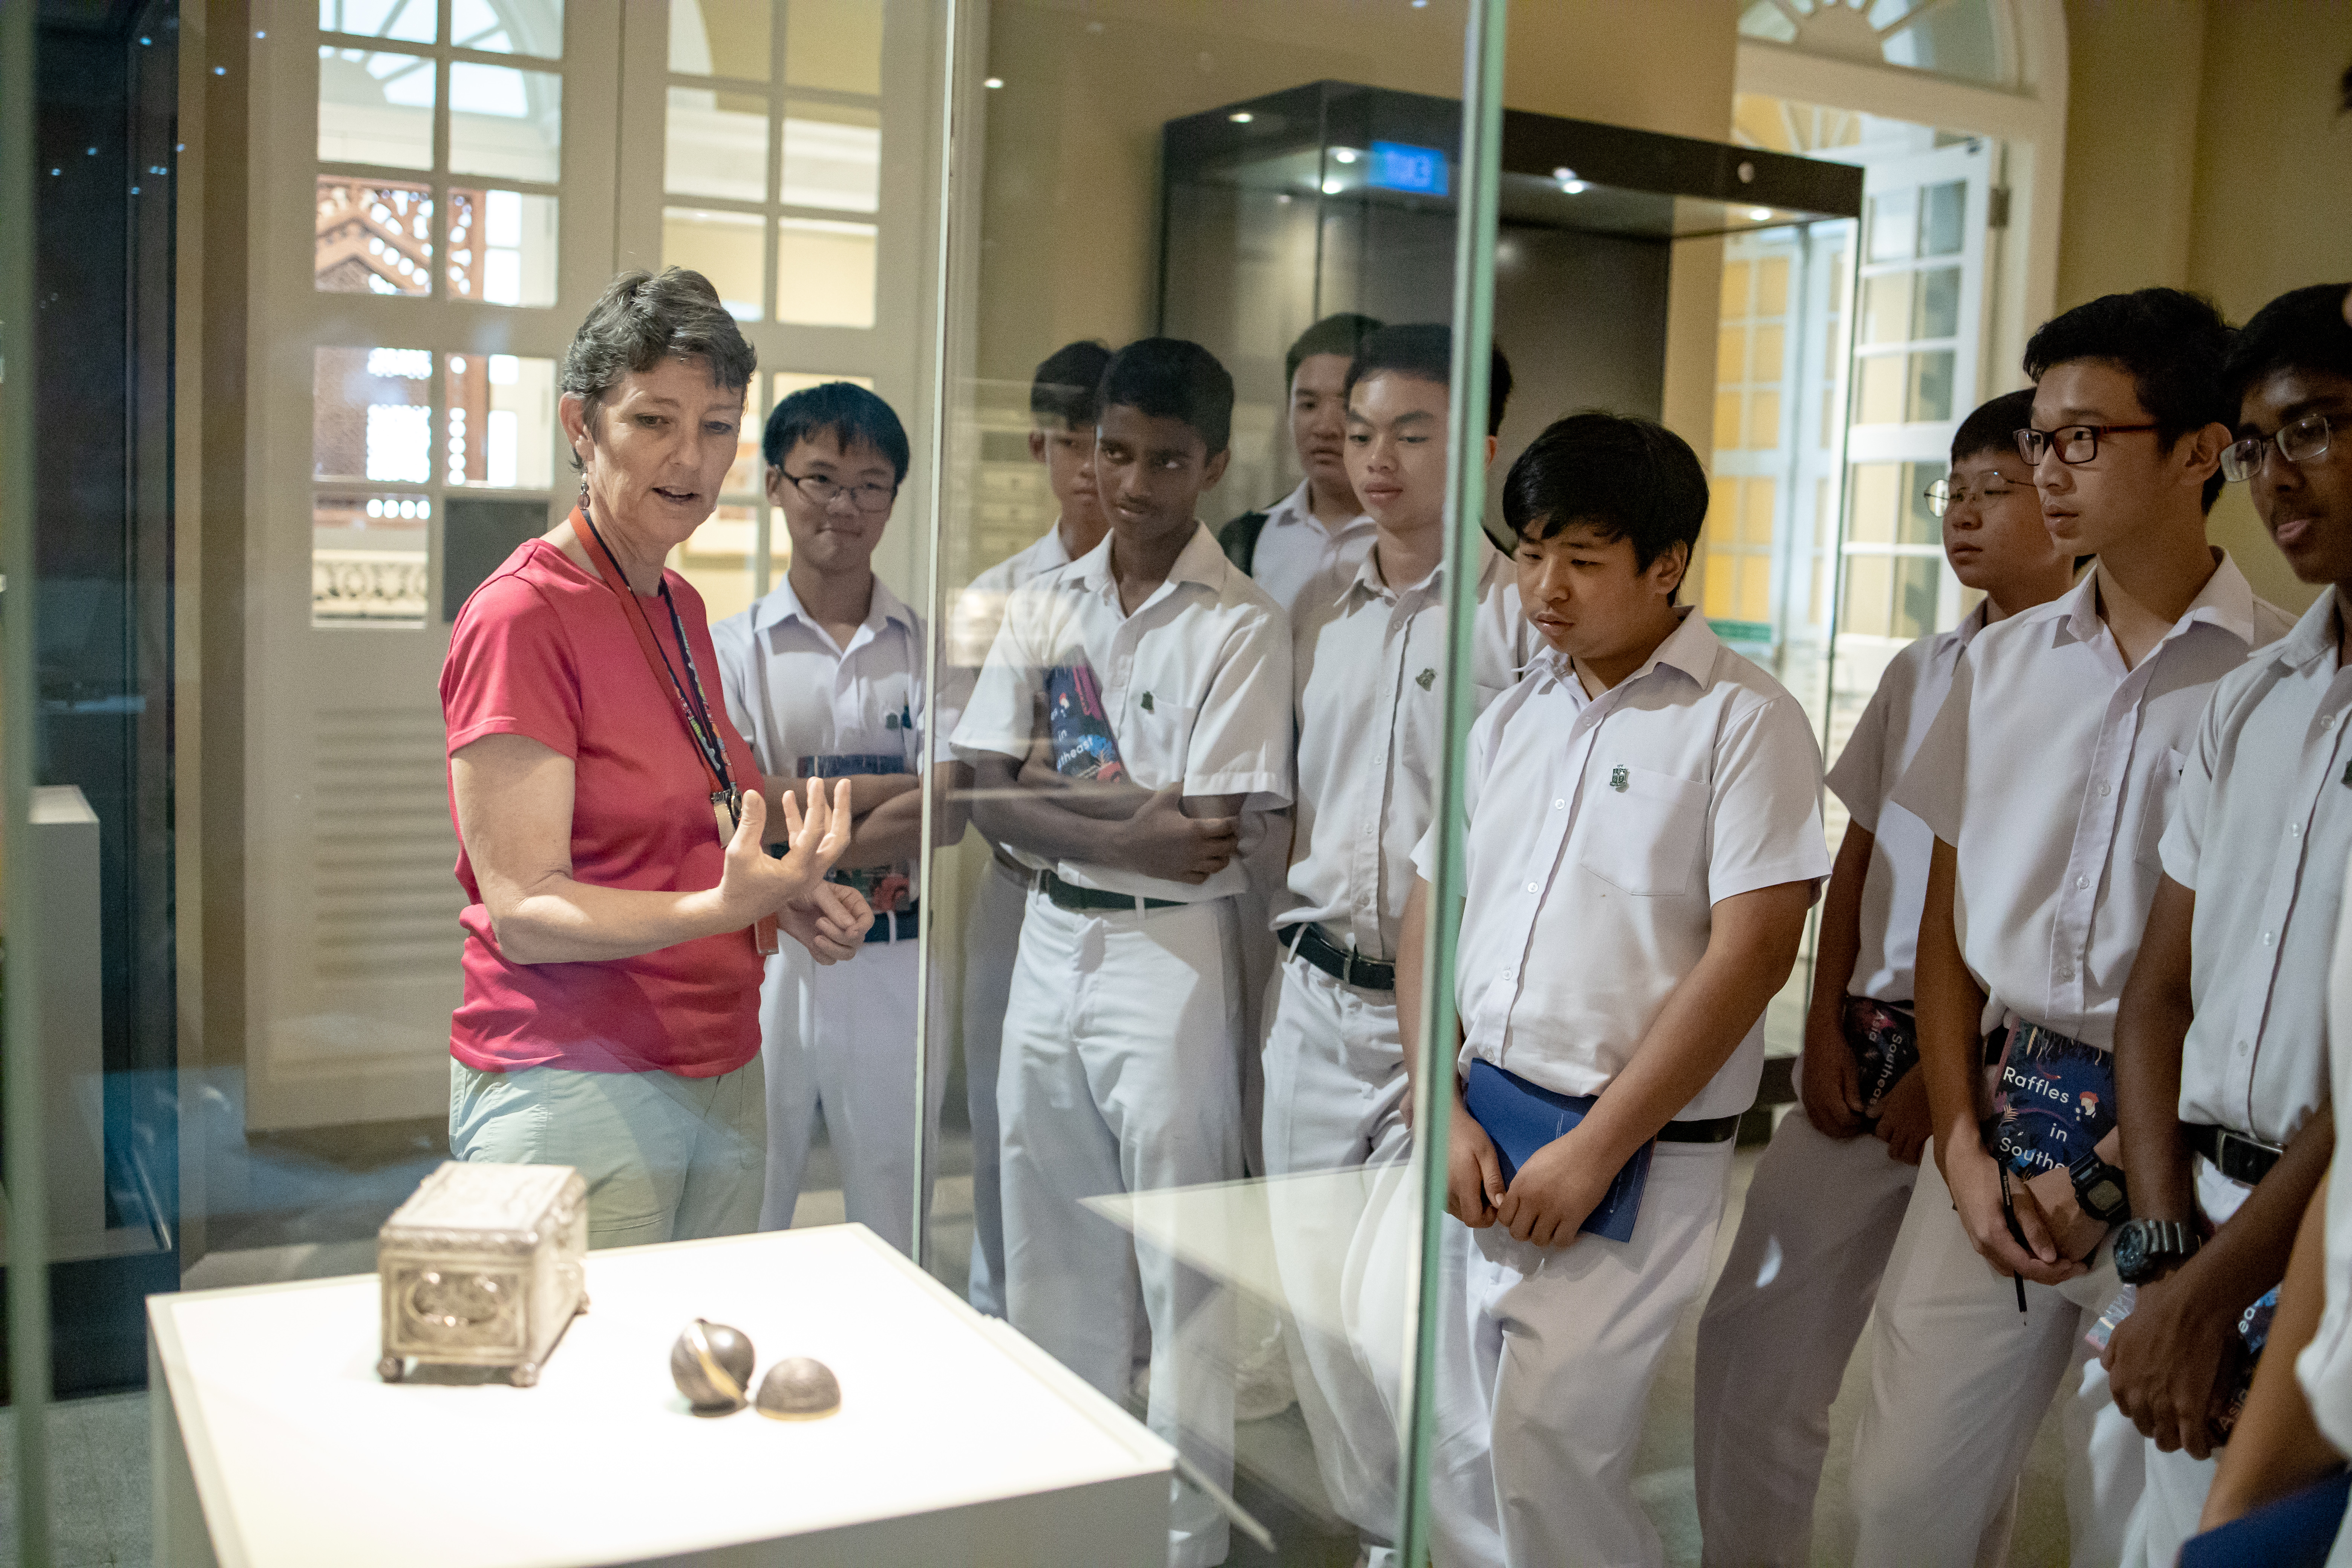 Students on a guided tour in the museum